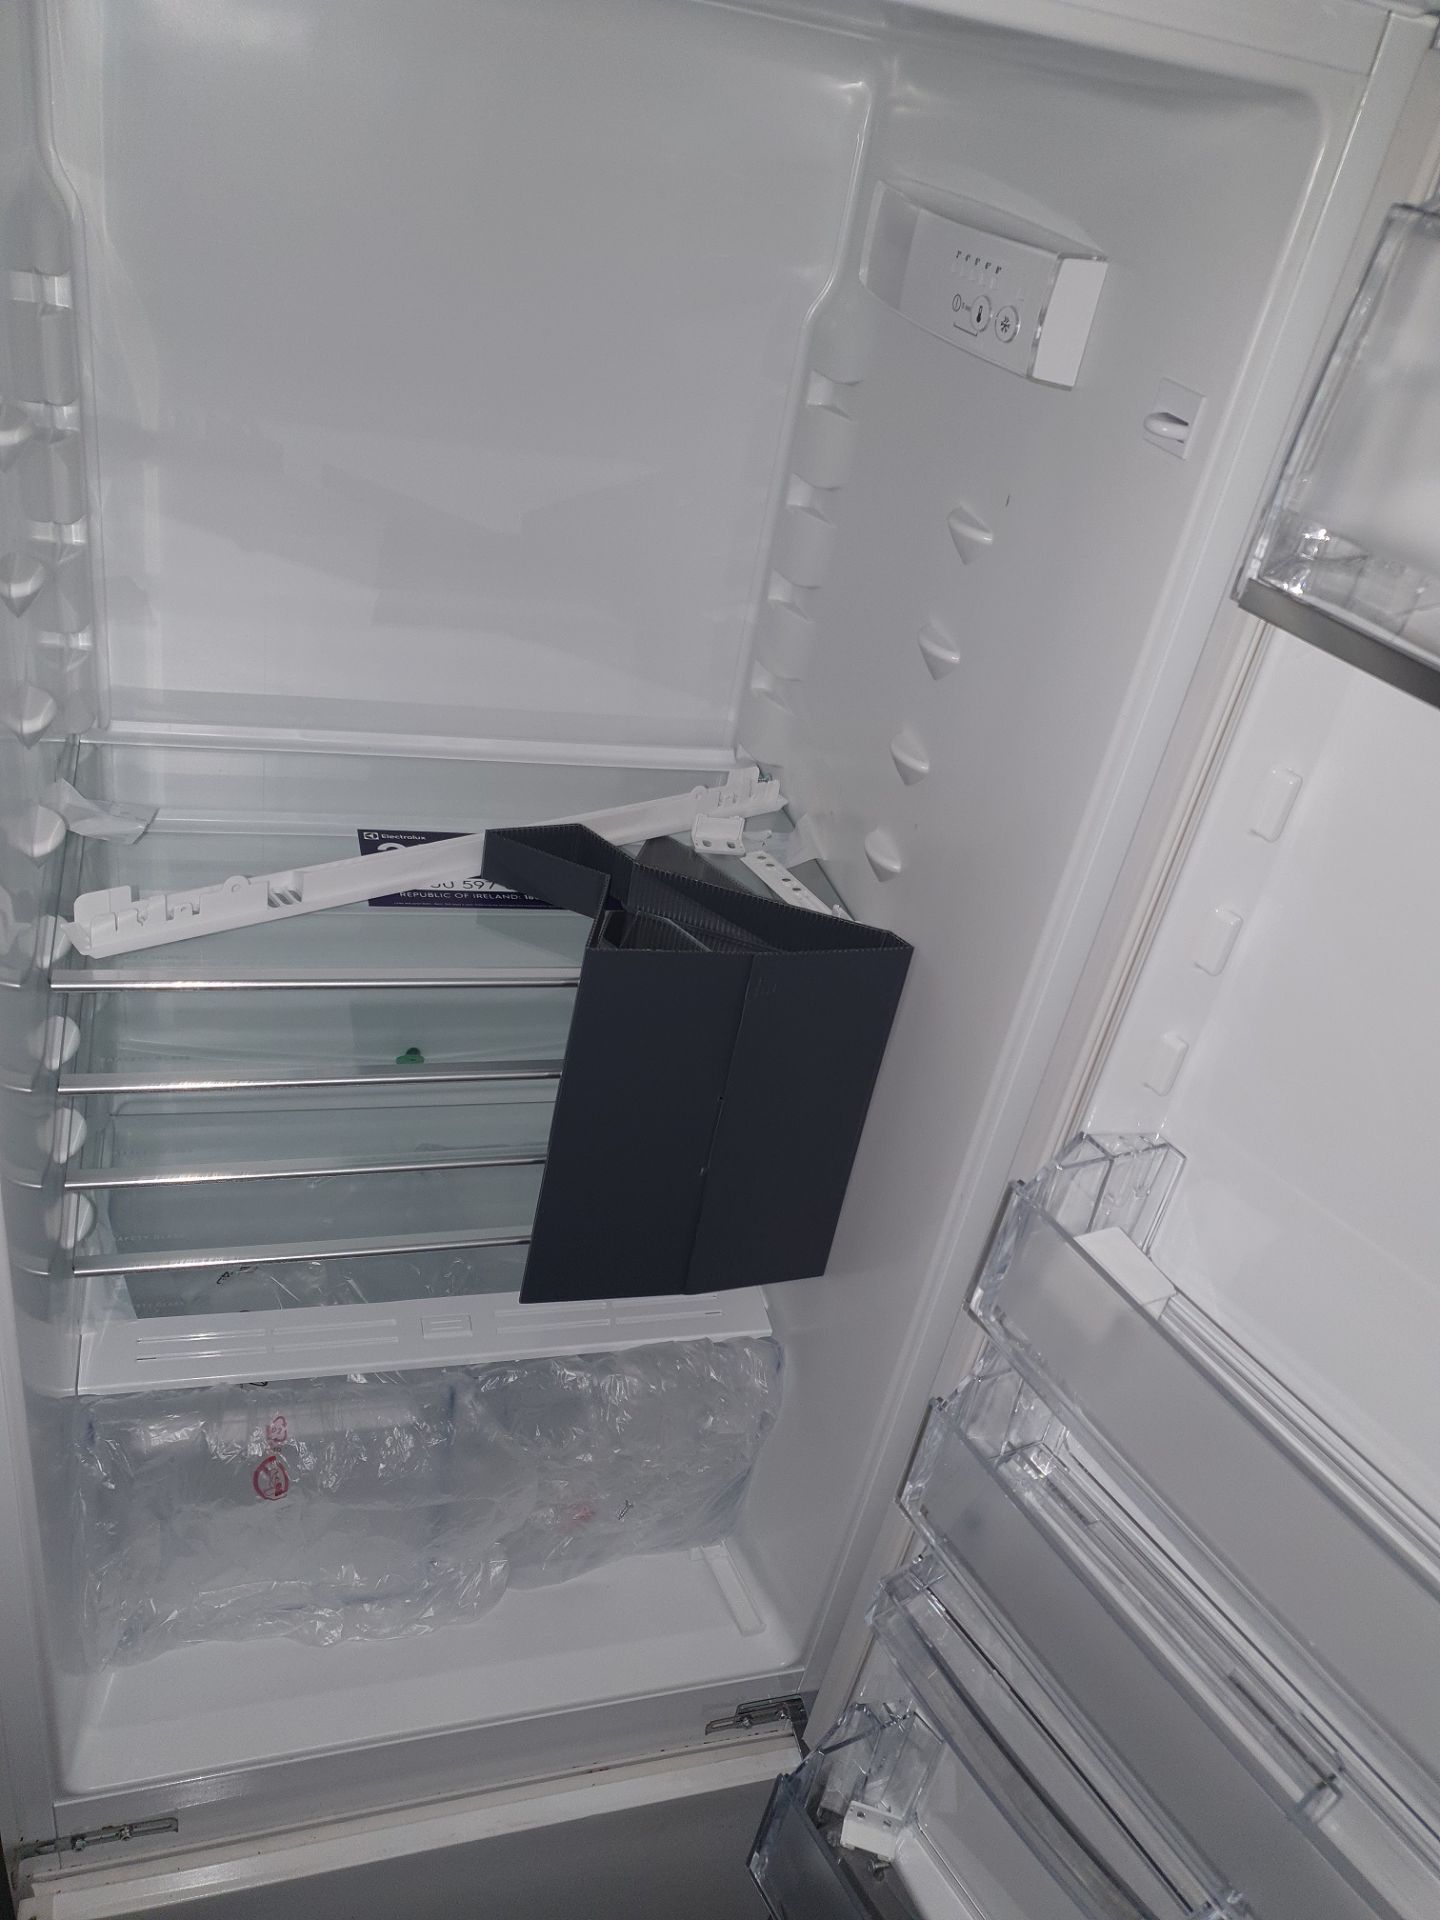 NEW/GRADED AND UNPACKAGED Prima Plus PRRF700 Built In Frost Free Fridge Freezer (Brand new slight - Image 14 of 14